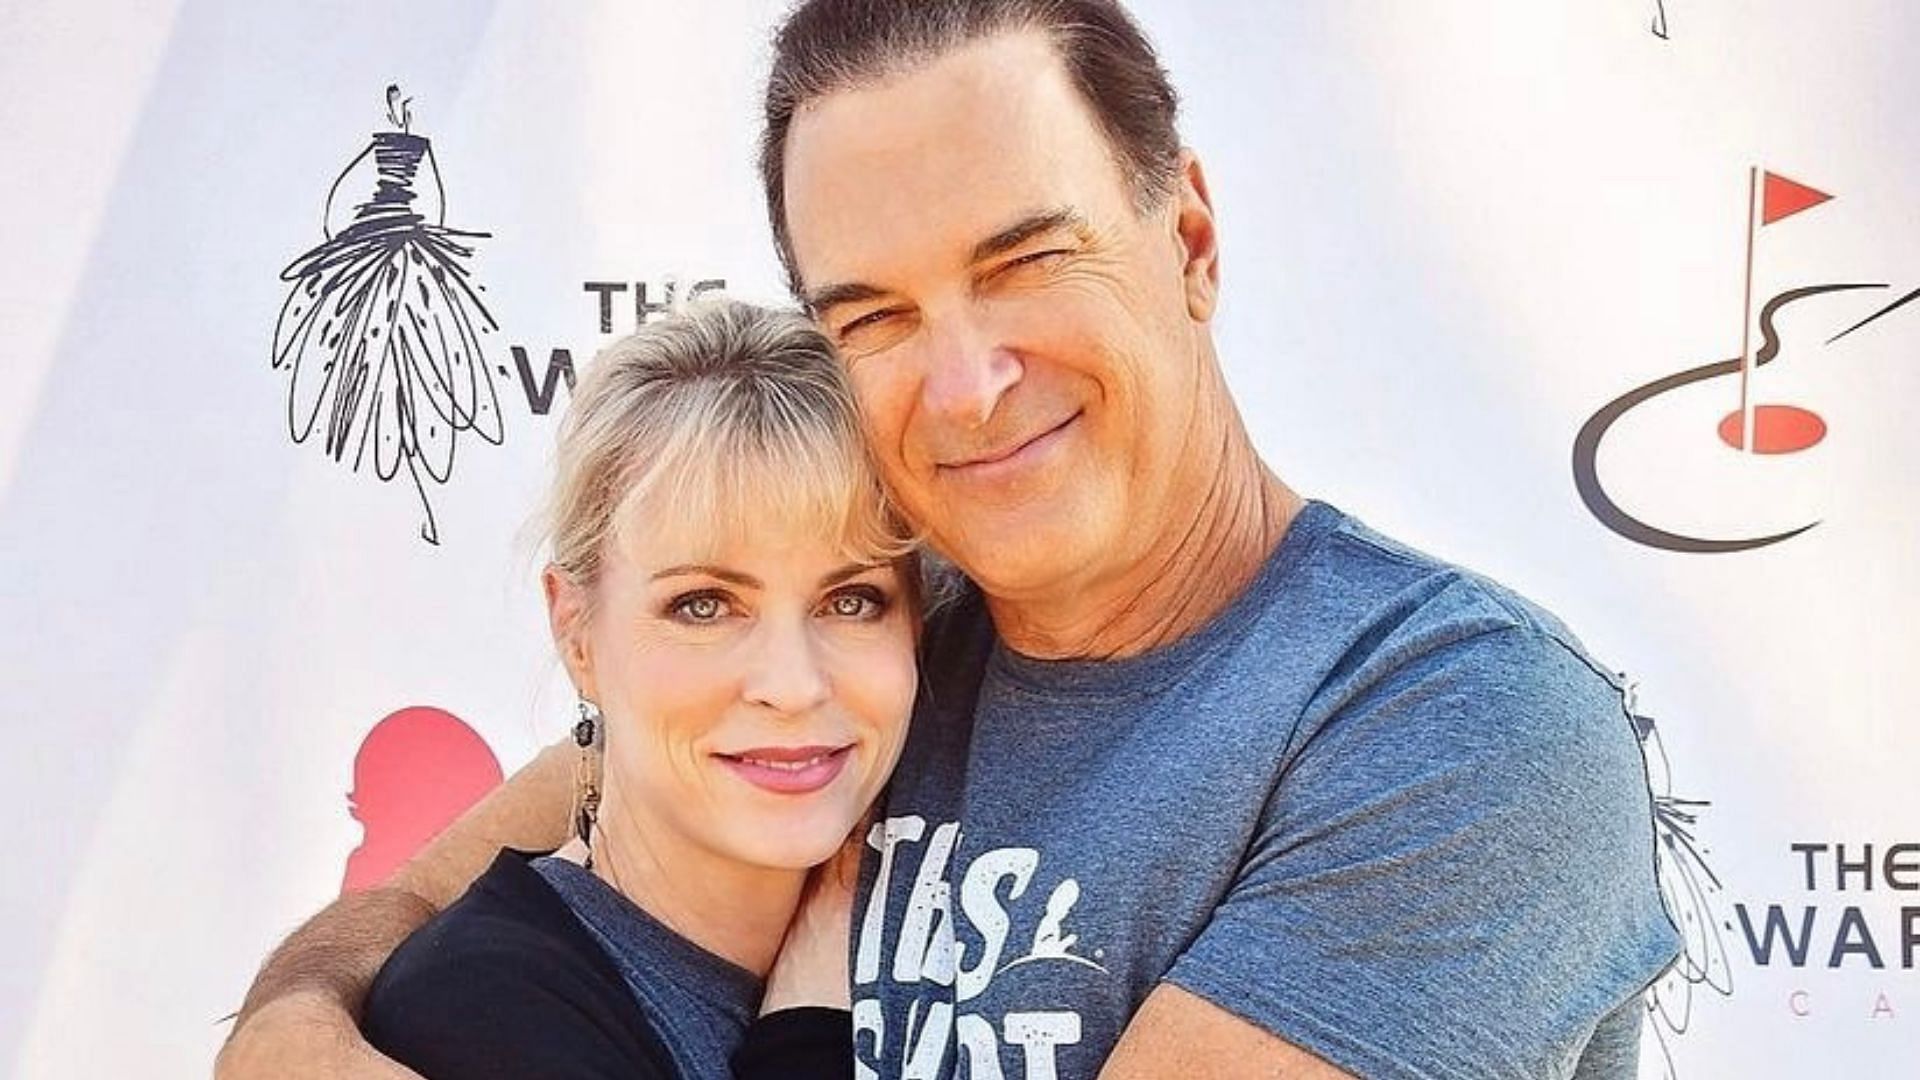 Famous artist Patrick Warburton made an appearance on the popular dating show  (Image via paddywarbucks/Instagram)